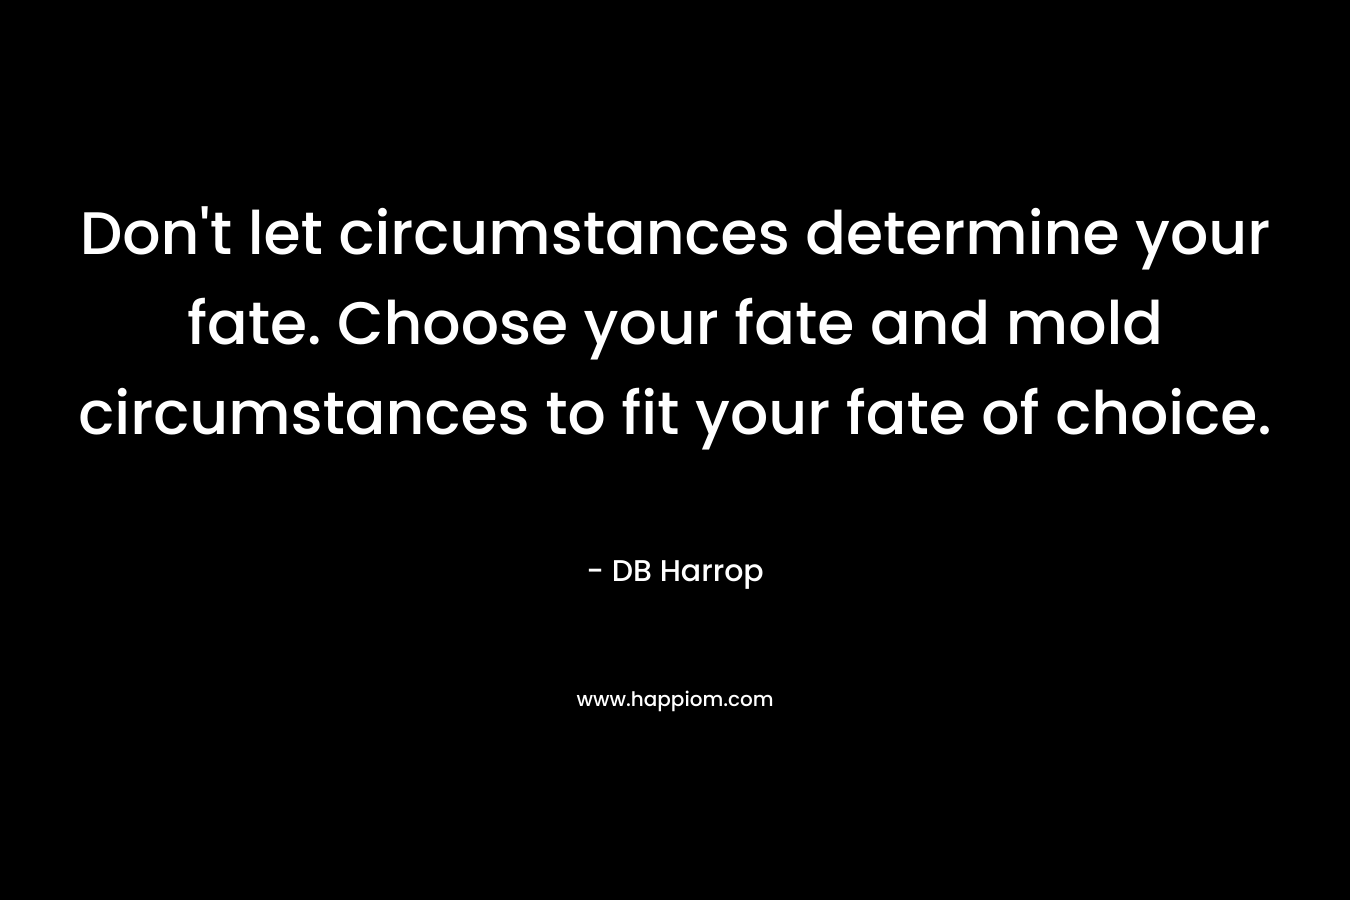 Don’t let circumstances determine your fate. Choose your fate and mold circumstances to fit your fate of choice. – DB Harrop